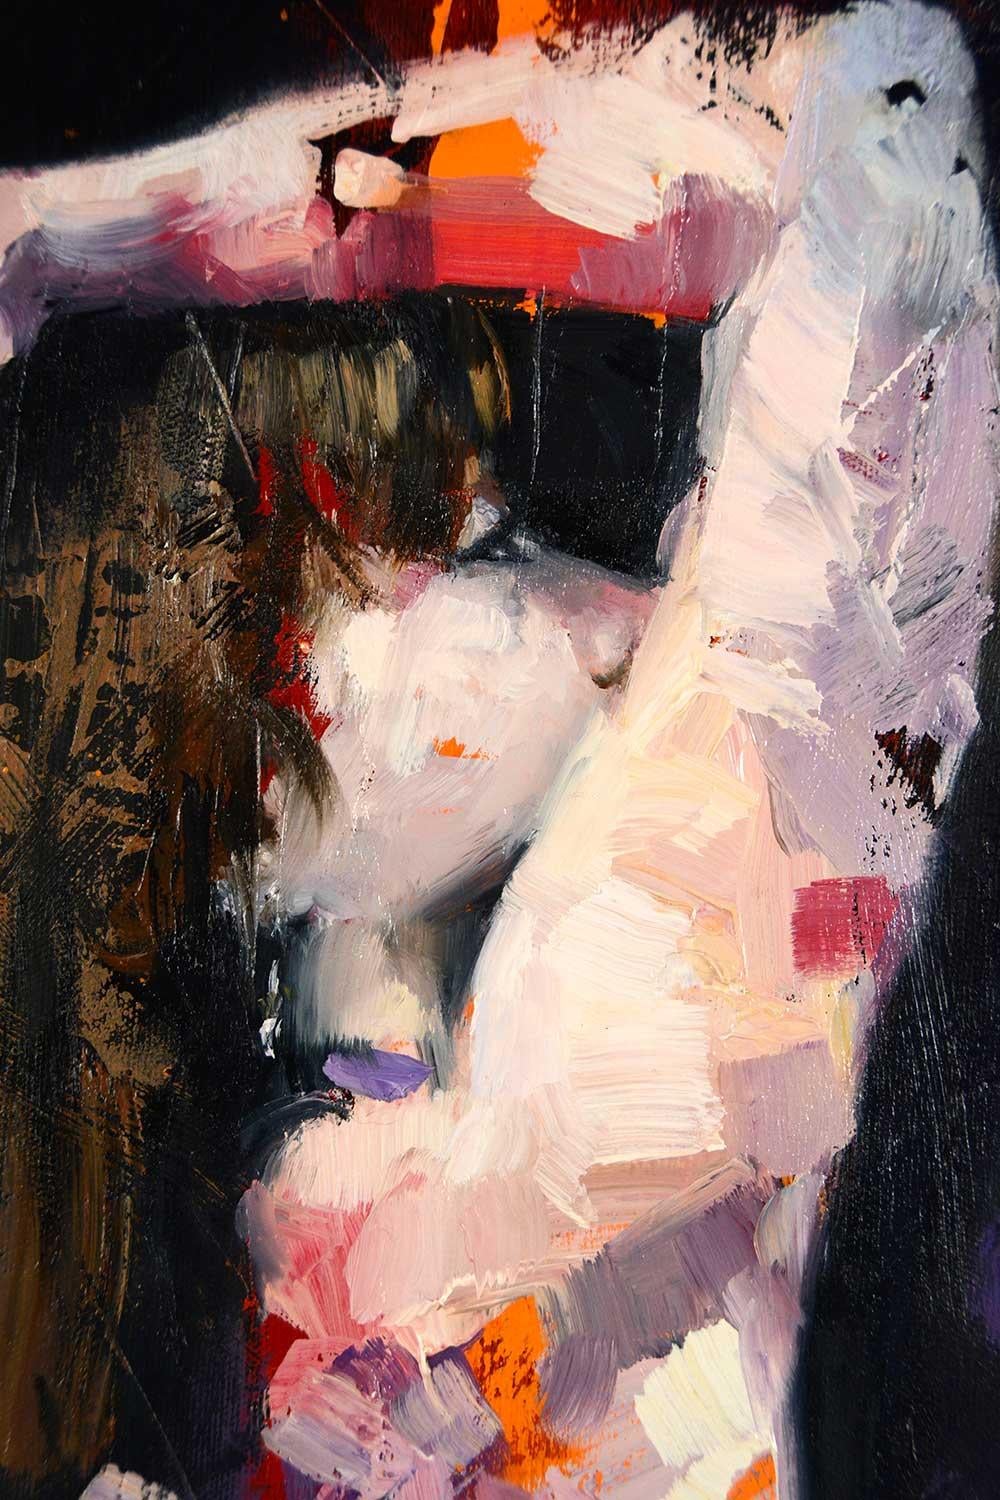 <p>Artist Comments<br>A woman emerges from abstract strokes of colors in this modern contemporary portrait by artist Gary Leonard. Light falls on her delicate figure as she poses with an expression of confidence and peace amidst a dramatic dark